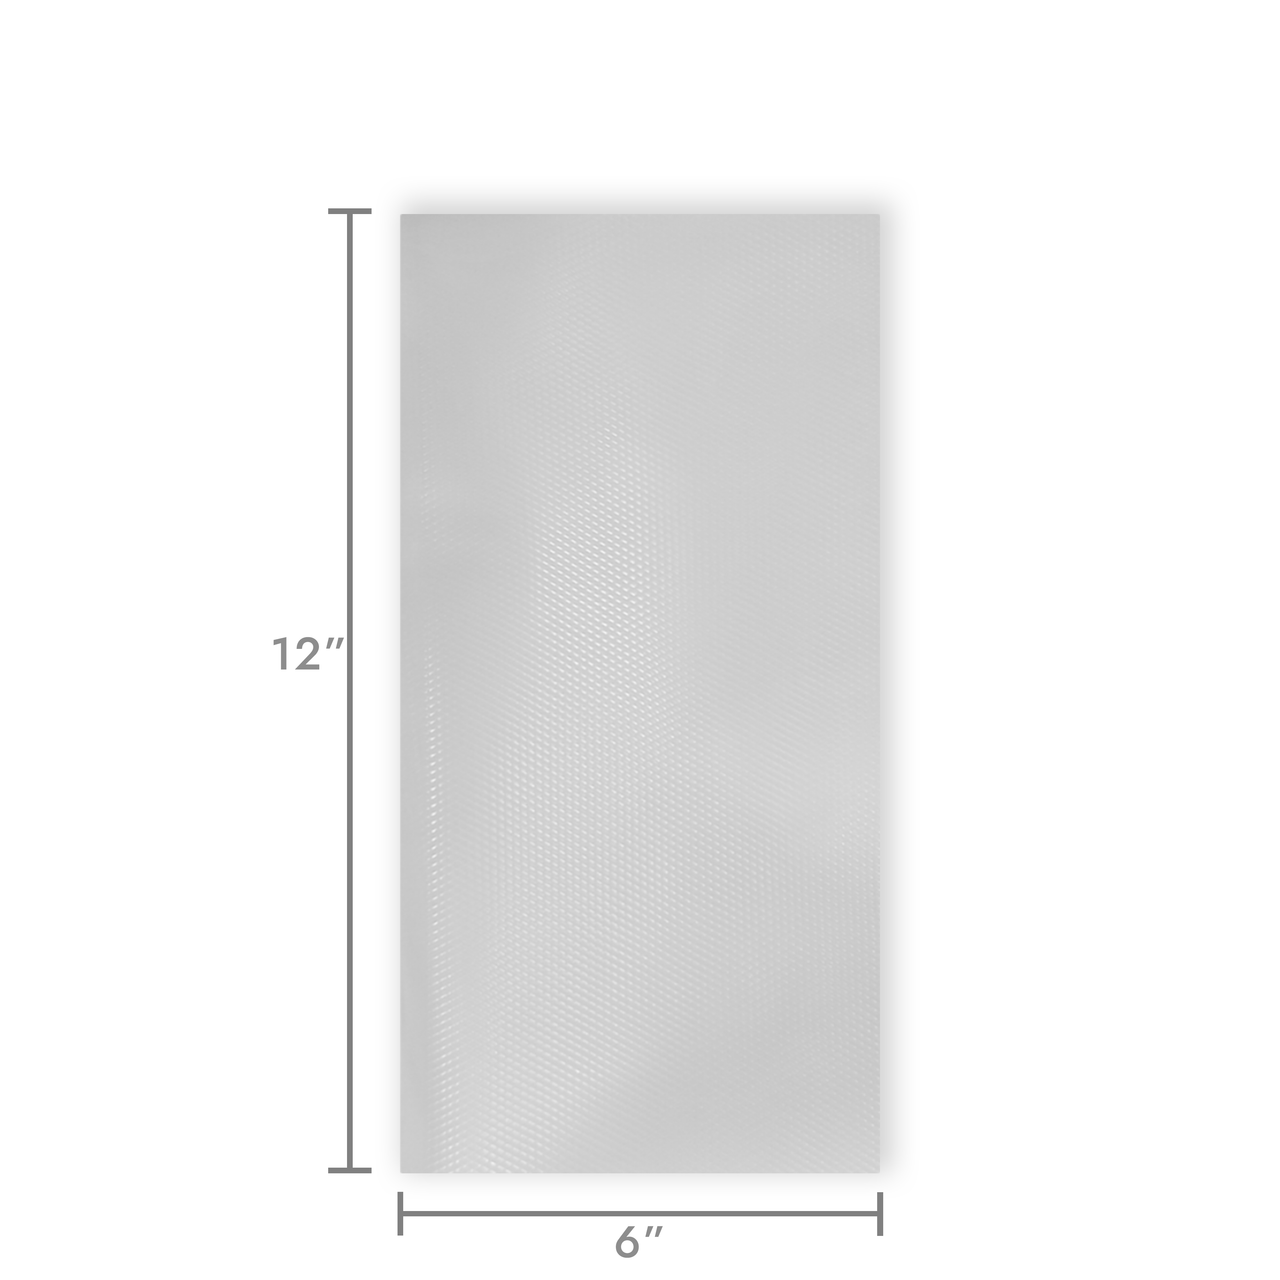 https://cdn11.bigcommerce.com/s-uyn0oyt/images/stencil/1280x1280/products/328/4112/Pint_Vacuum-Bag_Dimensions_White_Shadow__62246.1698708679.png?c=2